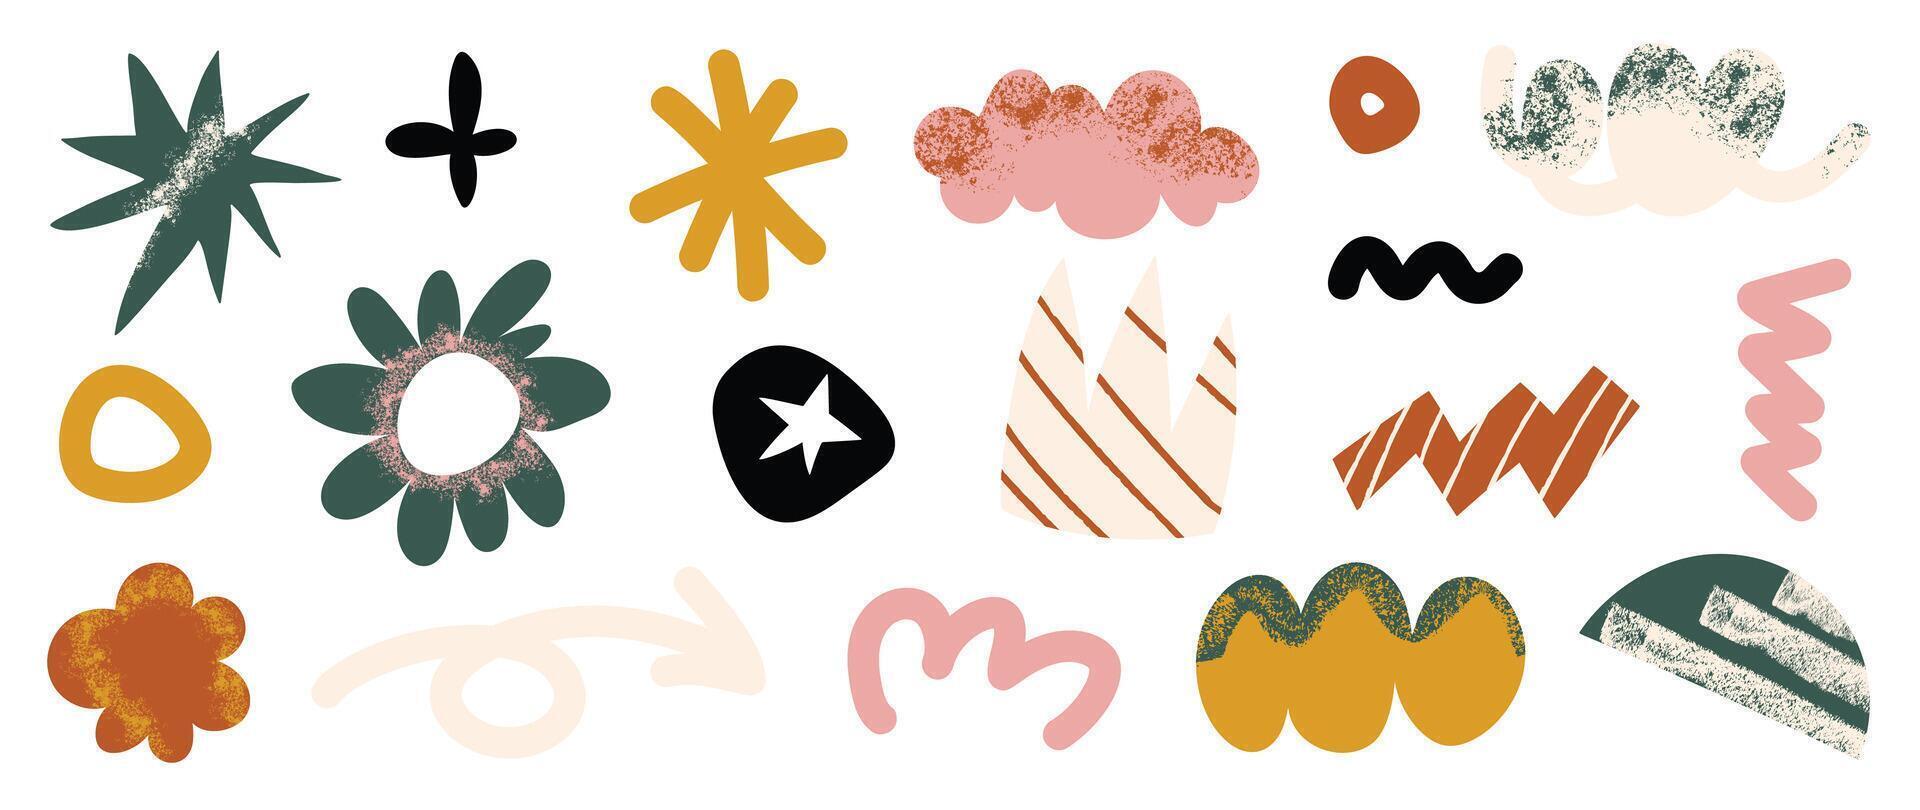 Set of abstract retro organic shapes . Collection of contemporary figure, cloud, flower, sparkle in funky groovy style. Cute hippie design element perfect for banner, print, stickers. vector